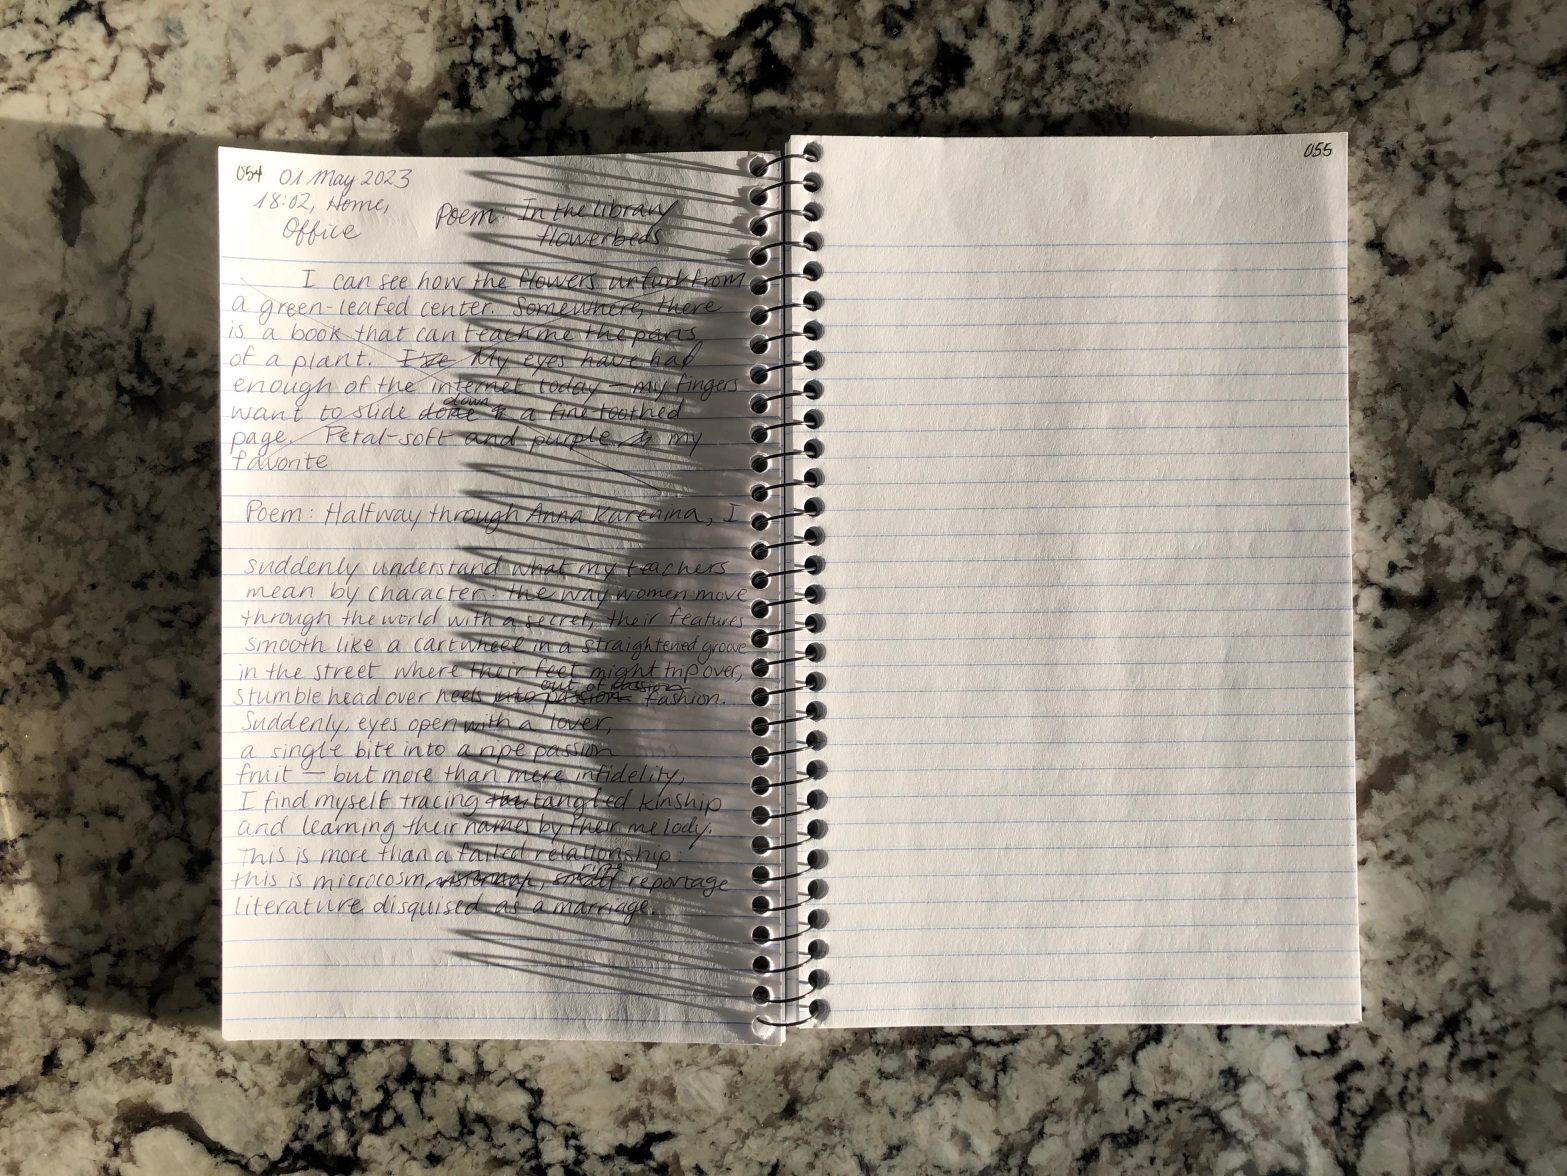 Photograph of a lined, spiral-bound notebook open with writing on the left page. Shadows from the spiral binding are cast to the left, onto the writing.